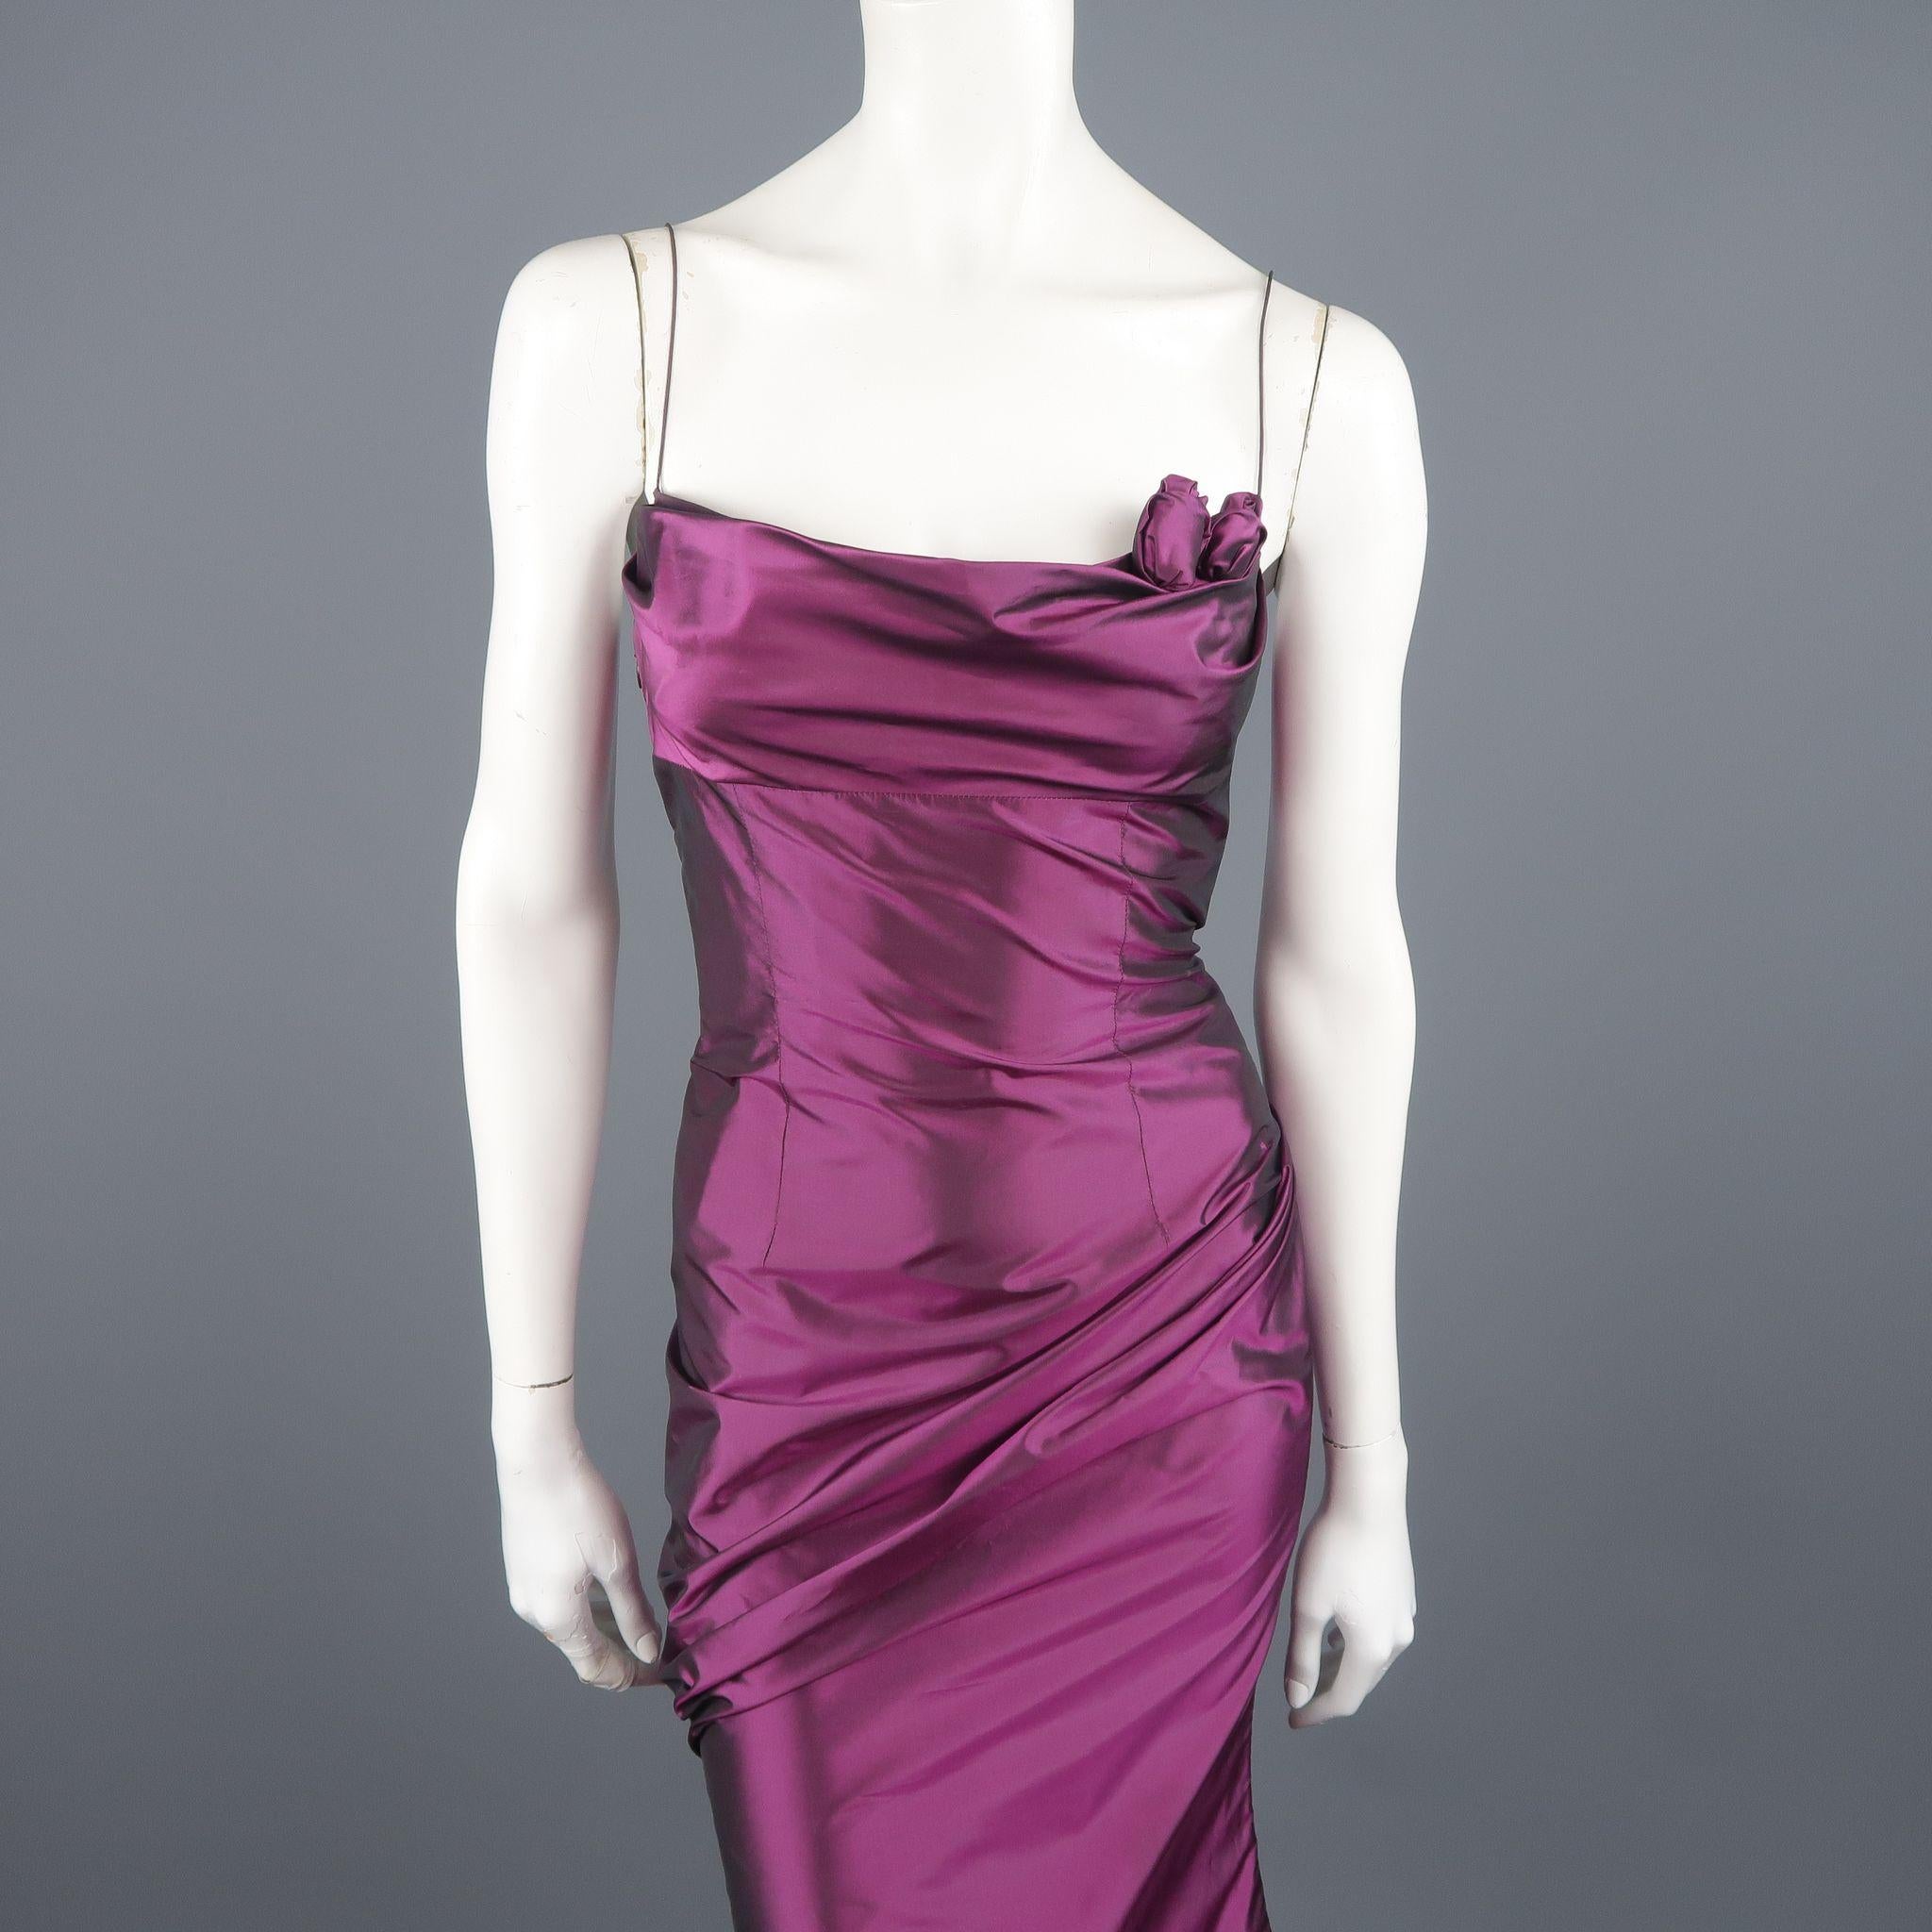 Vintage RICHARD TYLER COUTURE evening gown comes in fuchsia purple iridescent silk taffeta and features a gathered bust line, fitted body with draped side, spaghetti straps, and rosette applique details. Minor wear and marks under arms. Made in the